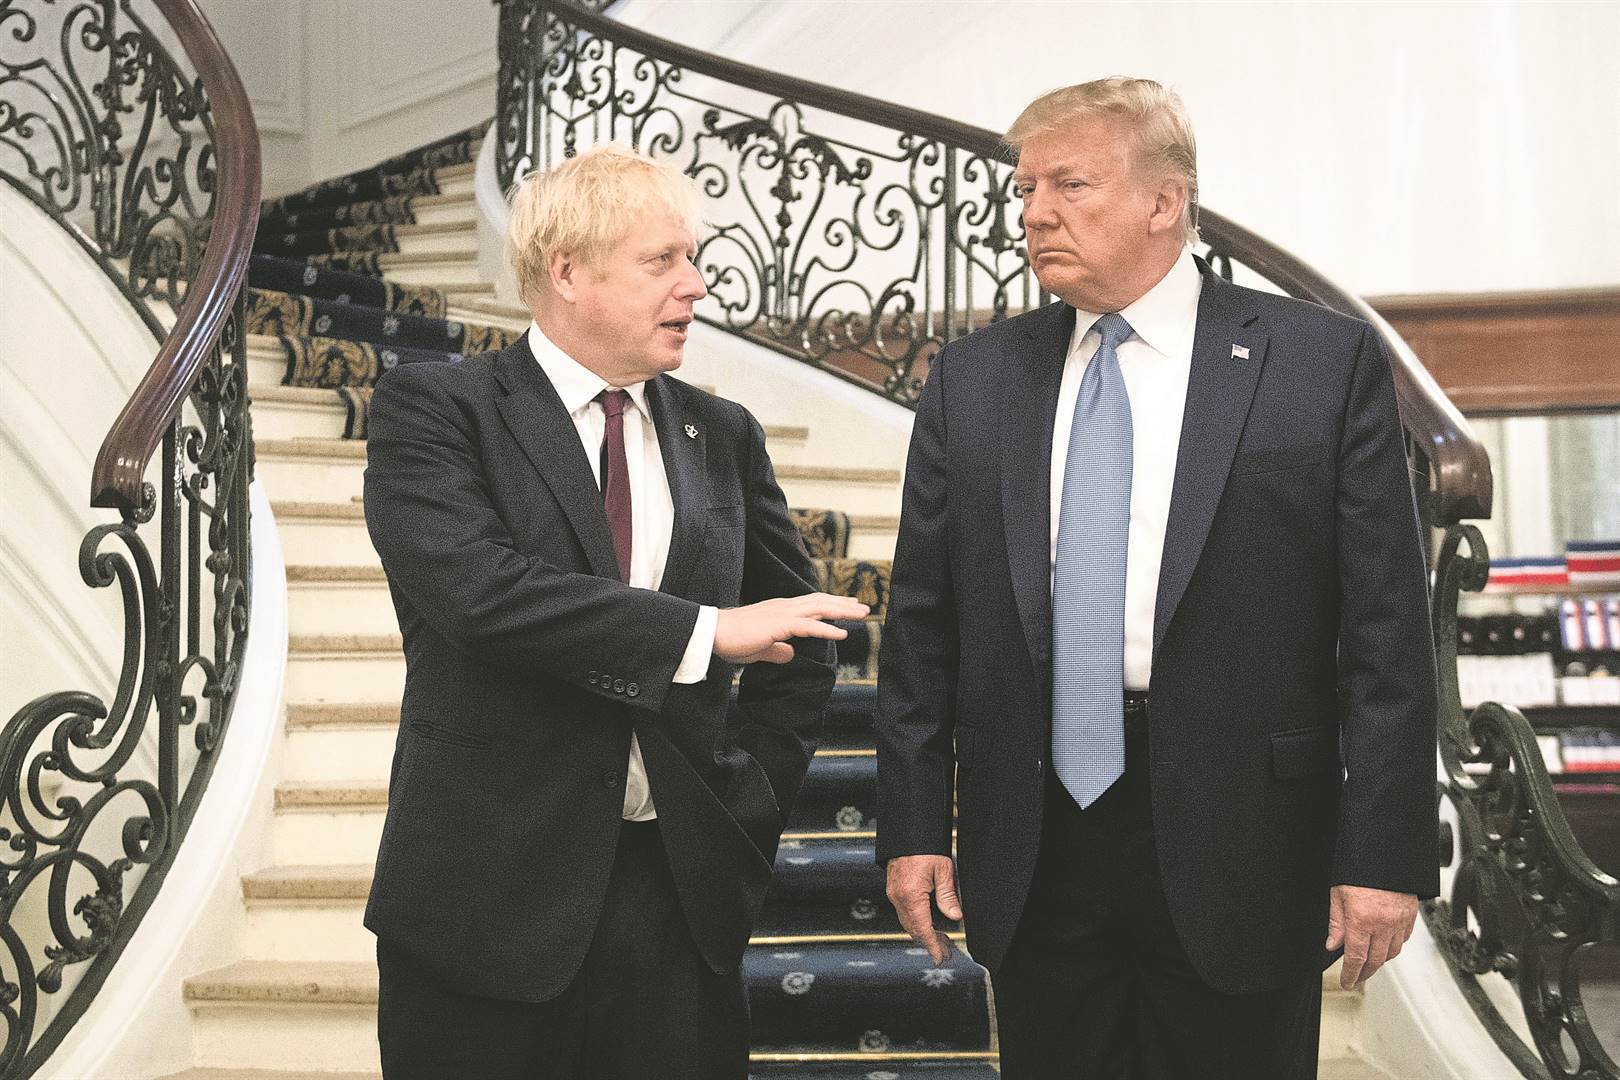 Birds of a feather: US President Donald Trump and Britain's Prime Minister Boris Johnson have triggered   unprecedented political crises in their respective countries. Picture: Stefan Rousseau / getty images